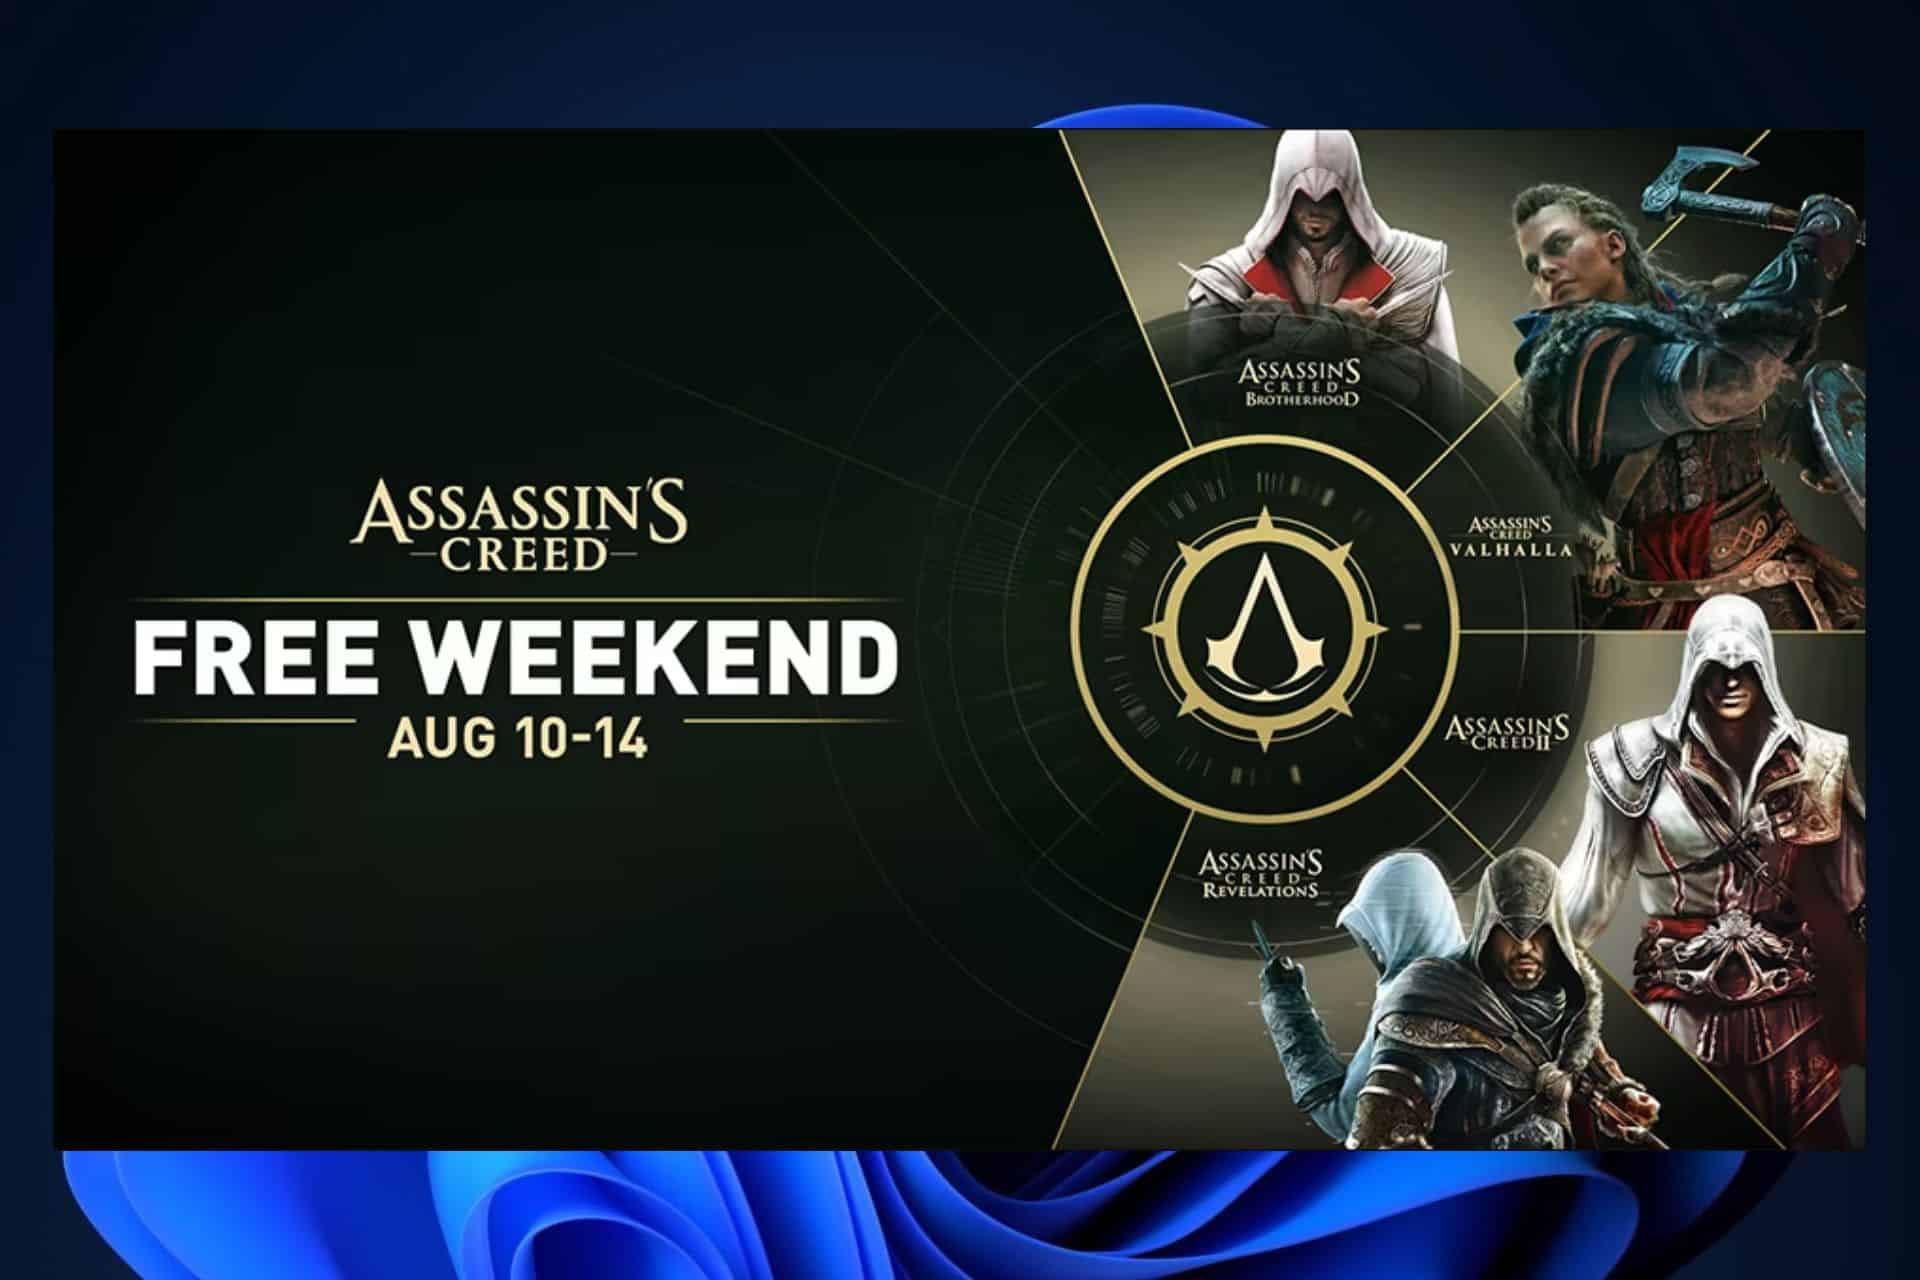 Free to play Assassin’s Creed + Buy 1, Get 2 free offer only this weekend